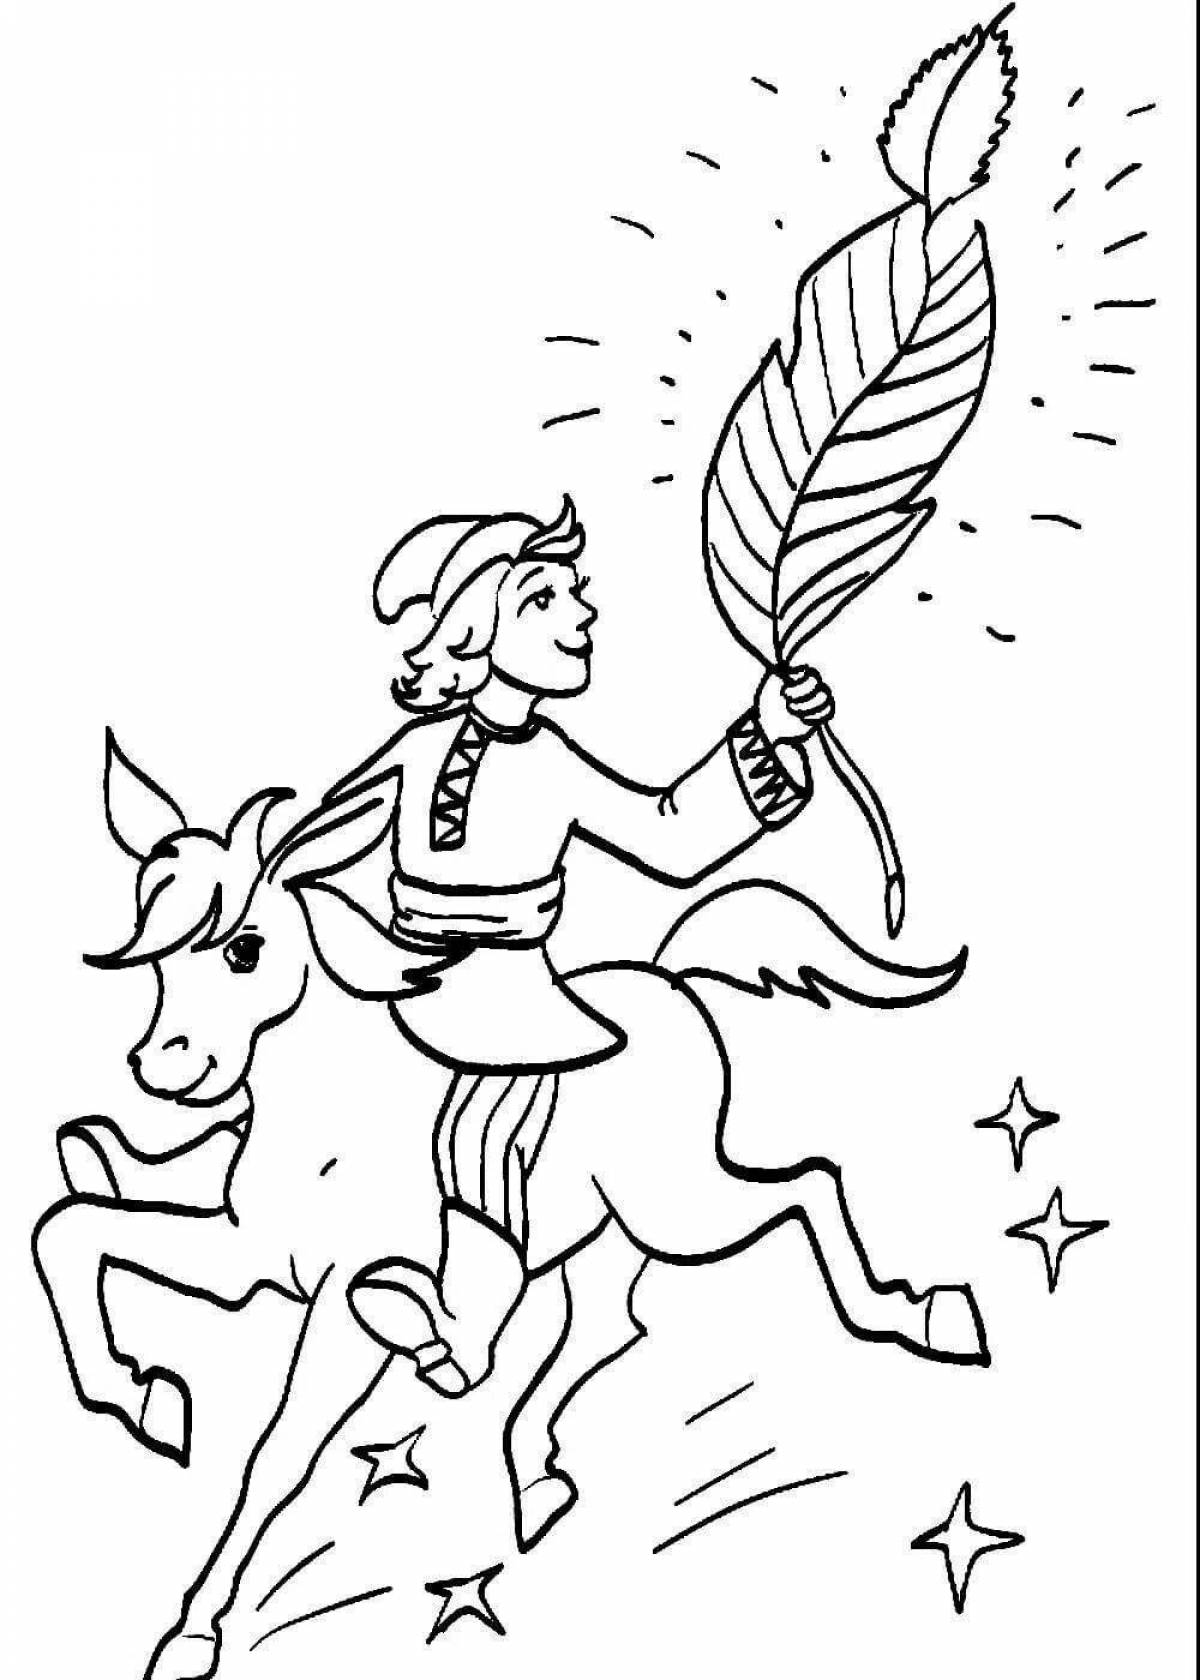 Coloring page generous little humpbacked horse